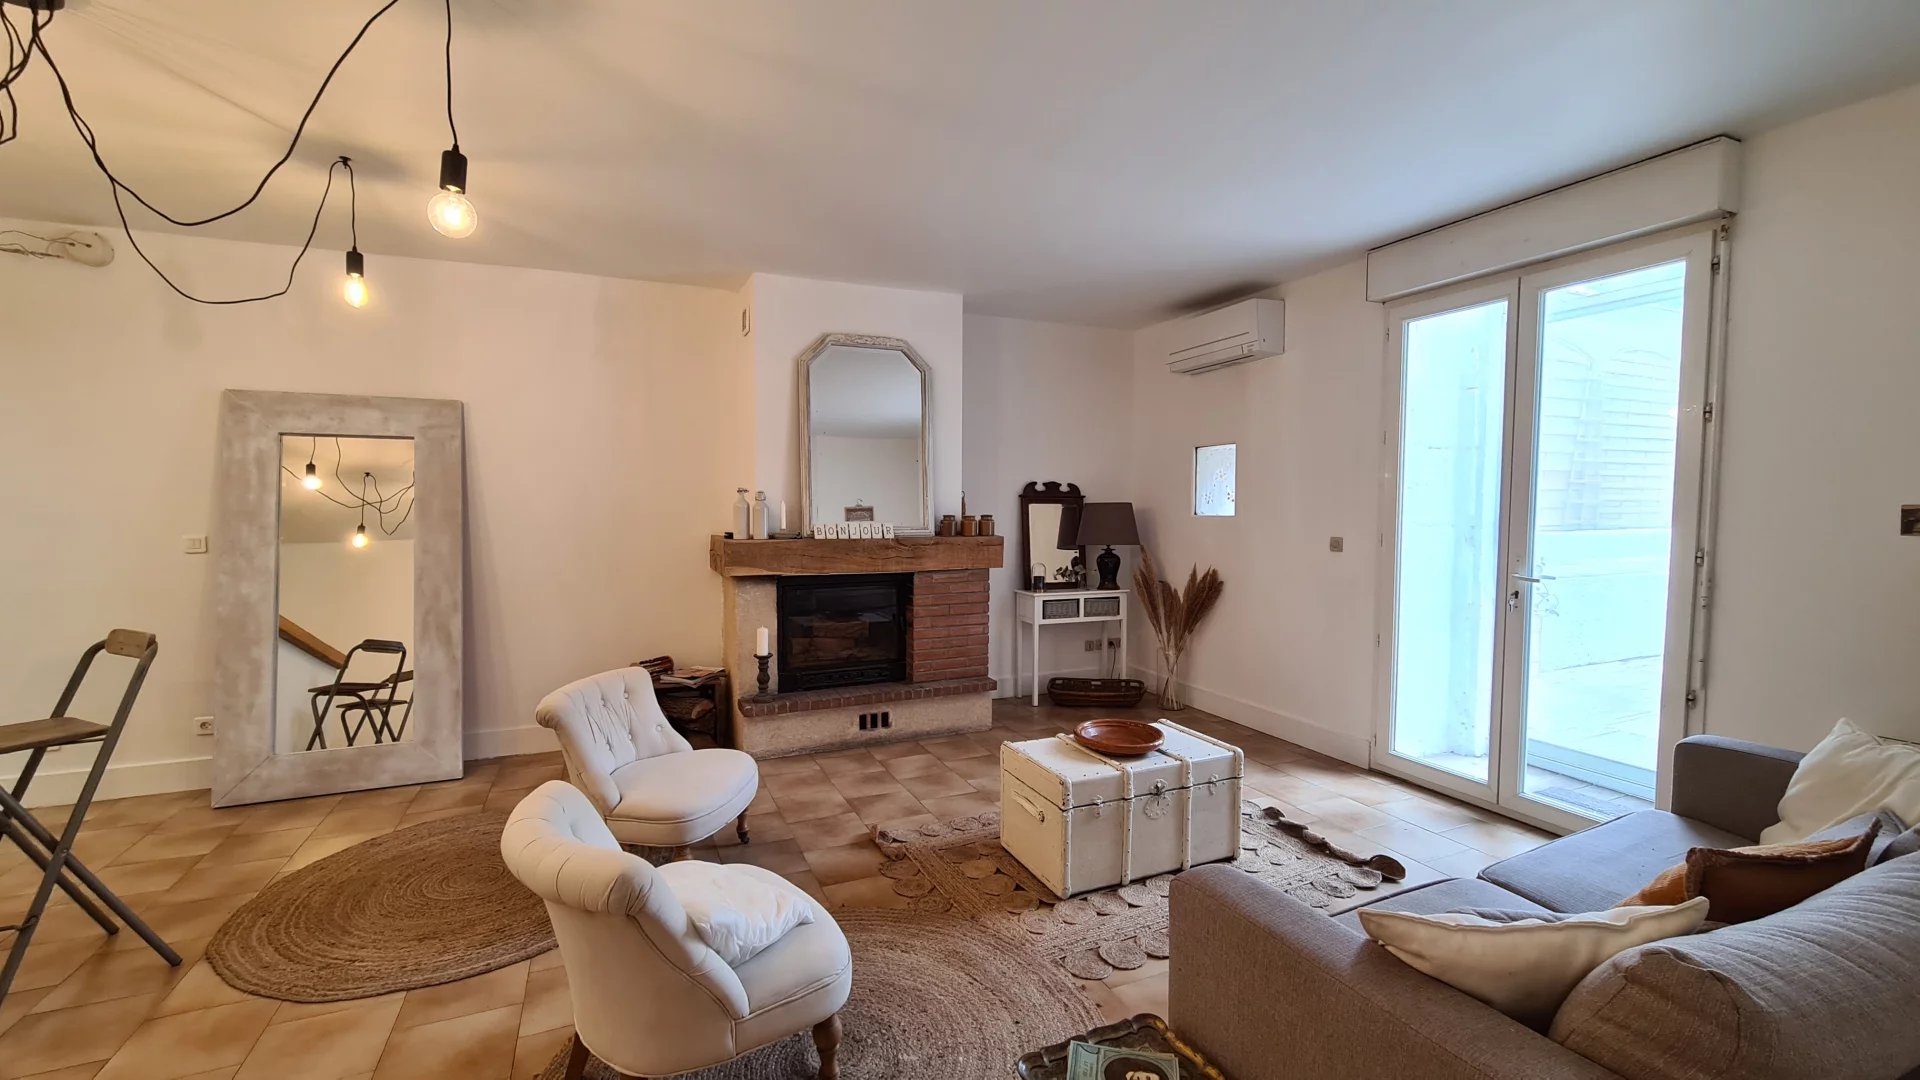 Central Pezenas - a stunning private courtyard of 80m2 with a two bedroom apartment